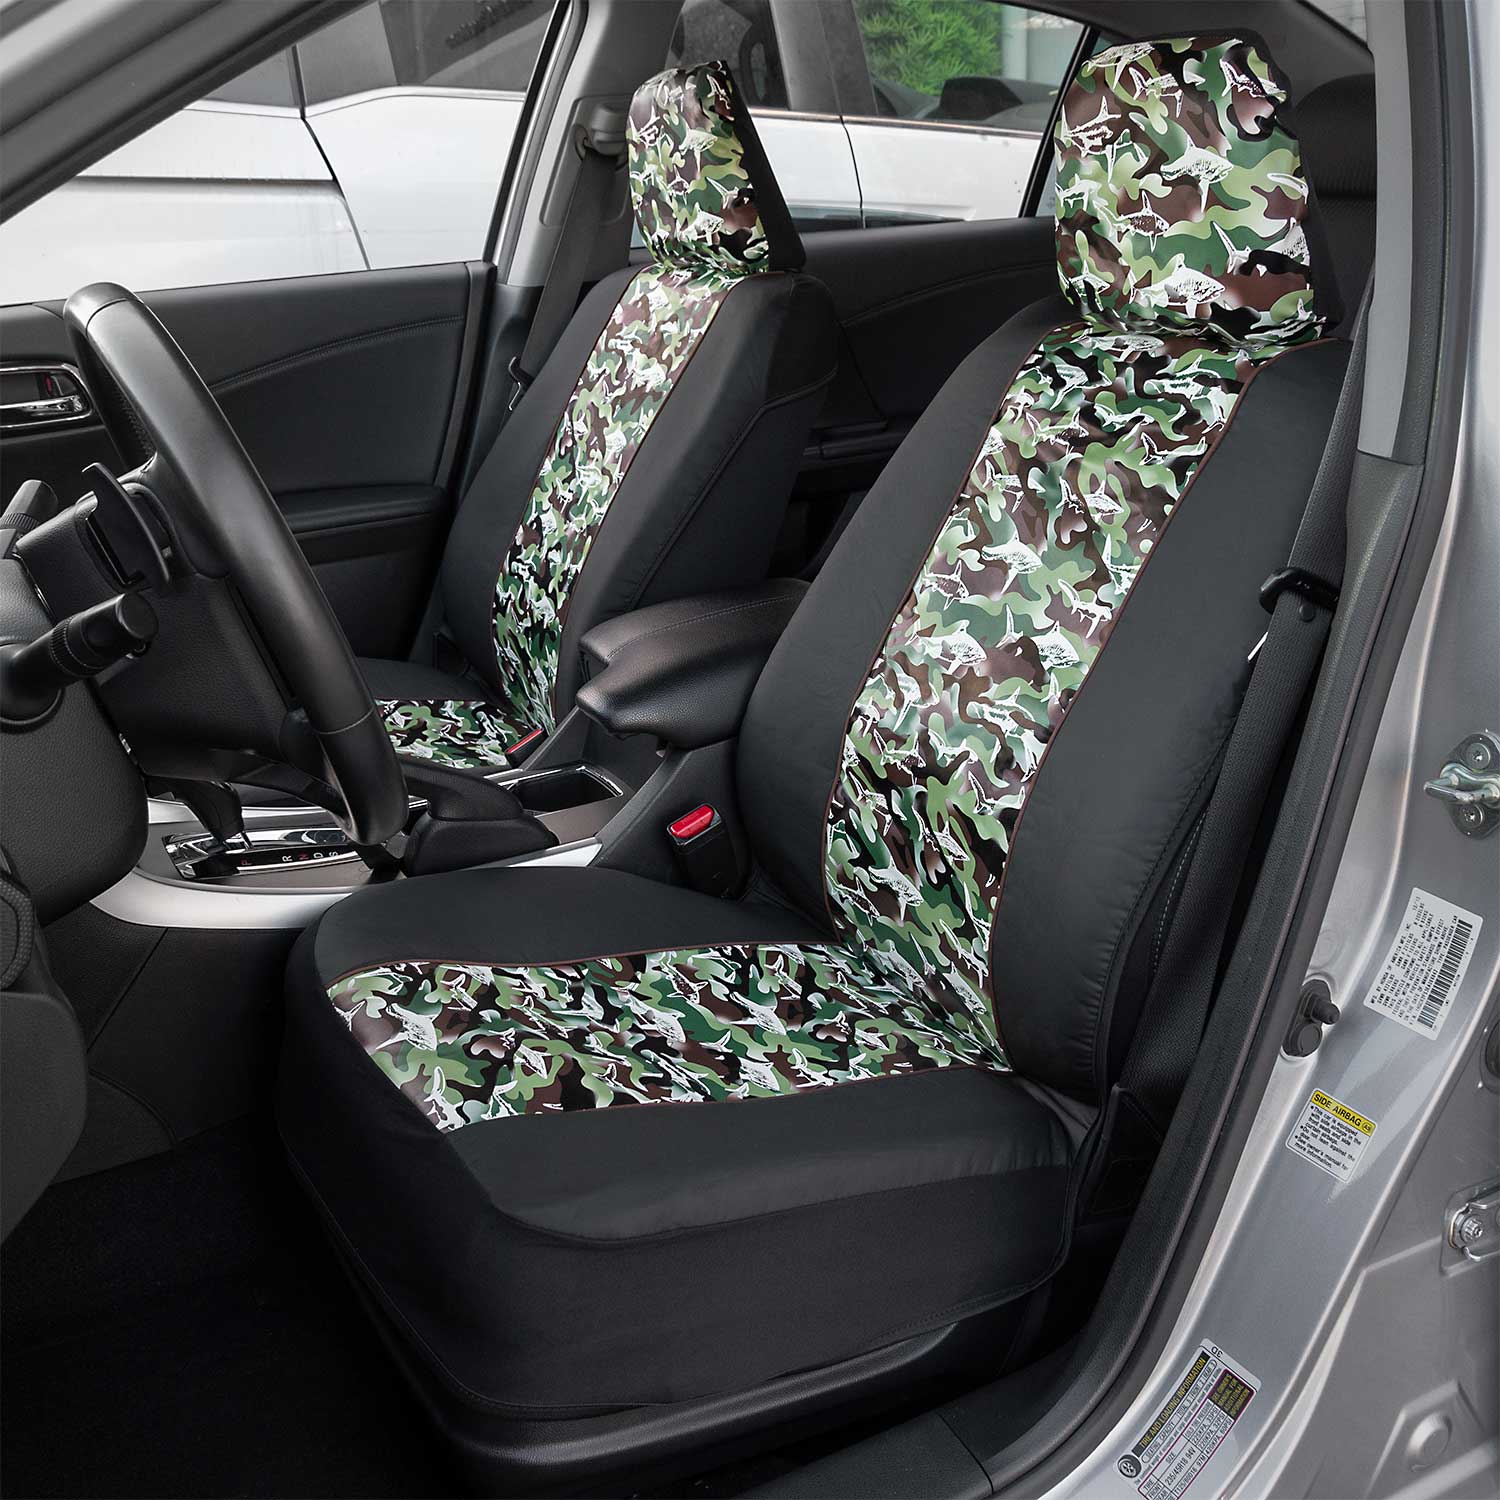 BDK Green Camo Car Seat Covers for Front Seats, 2 Pack – Camouflage Pattern Front Seat Cover Set with Matching Headrest, Sideless Design for Easy Installation, Fits Most Car Truck Van and SUV